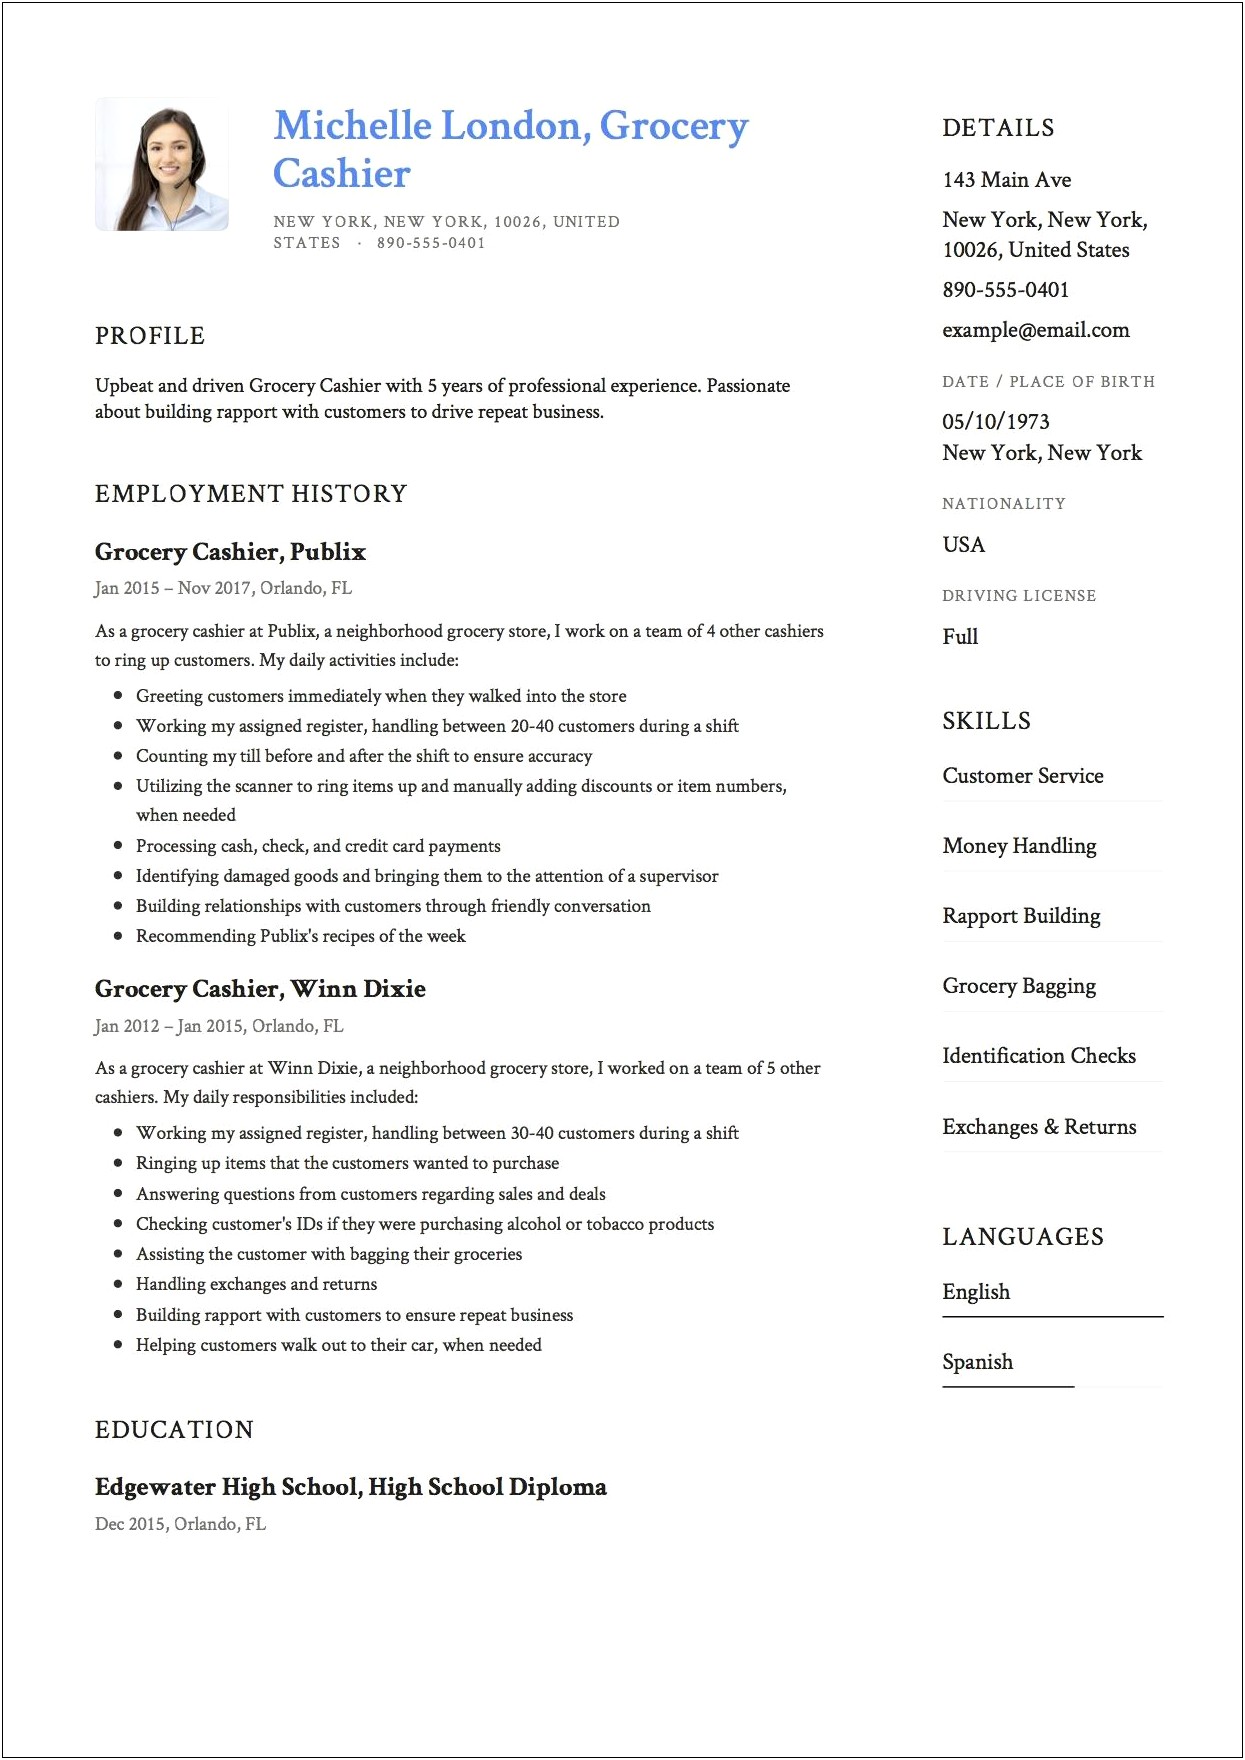 Sample Resume For A Cashier At Grocery Store